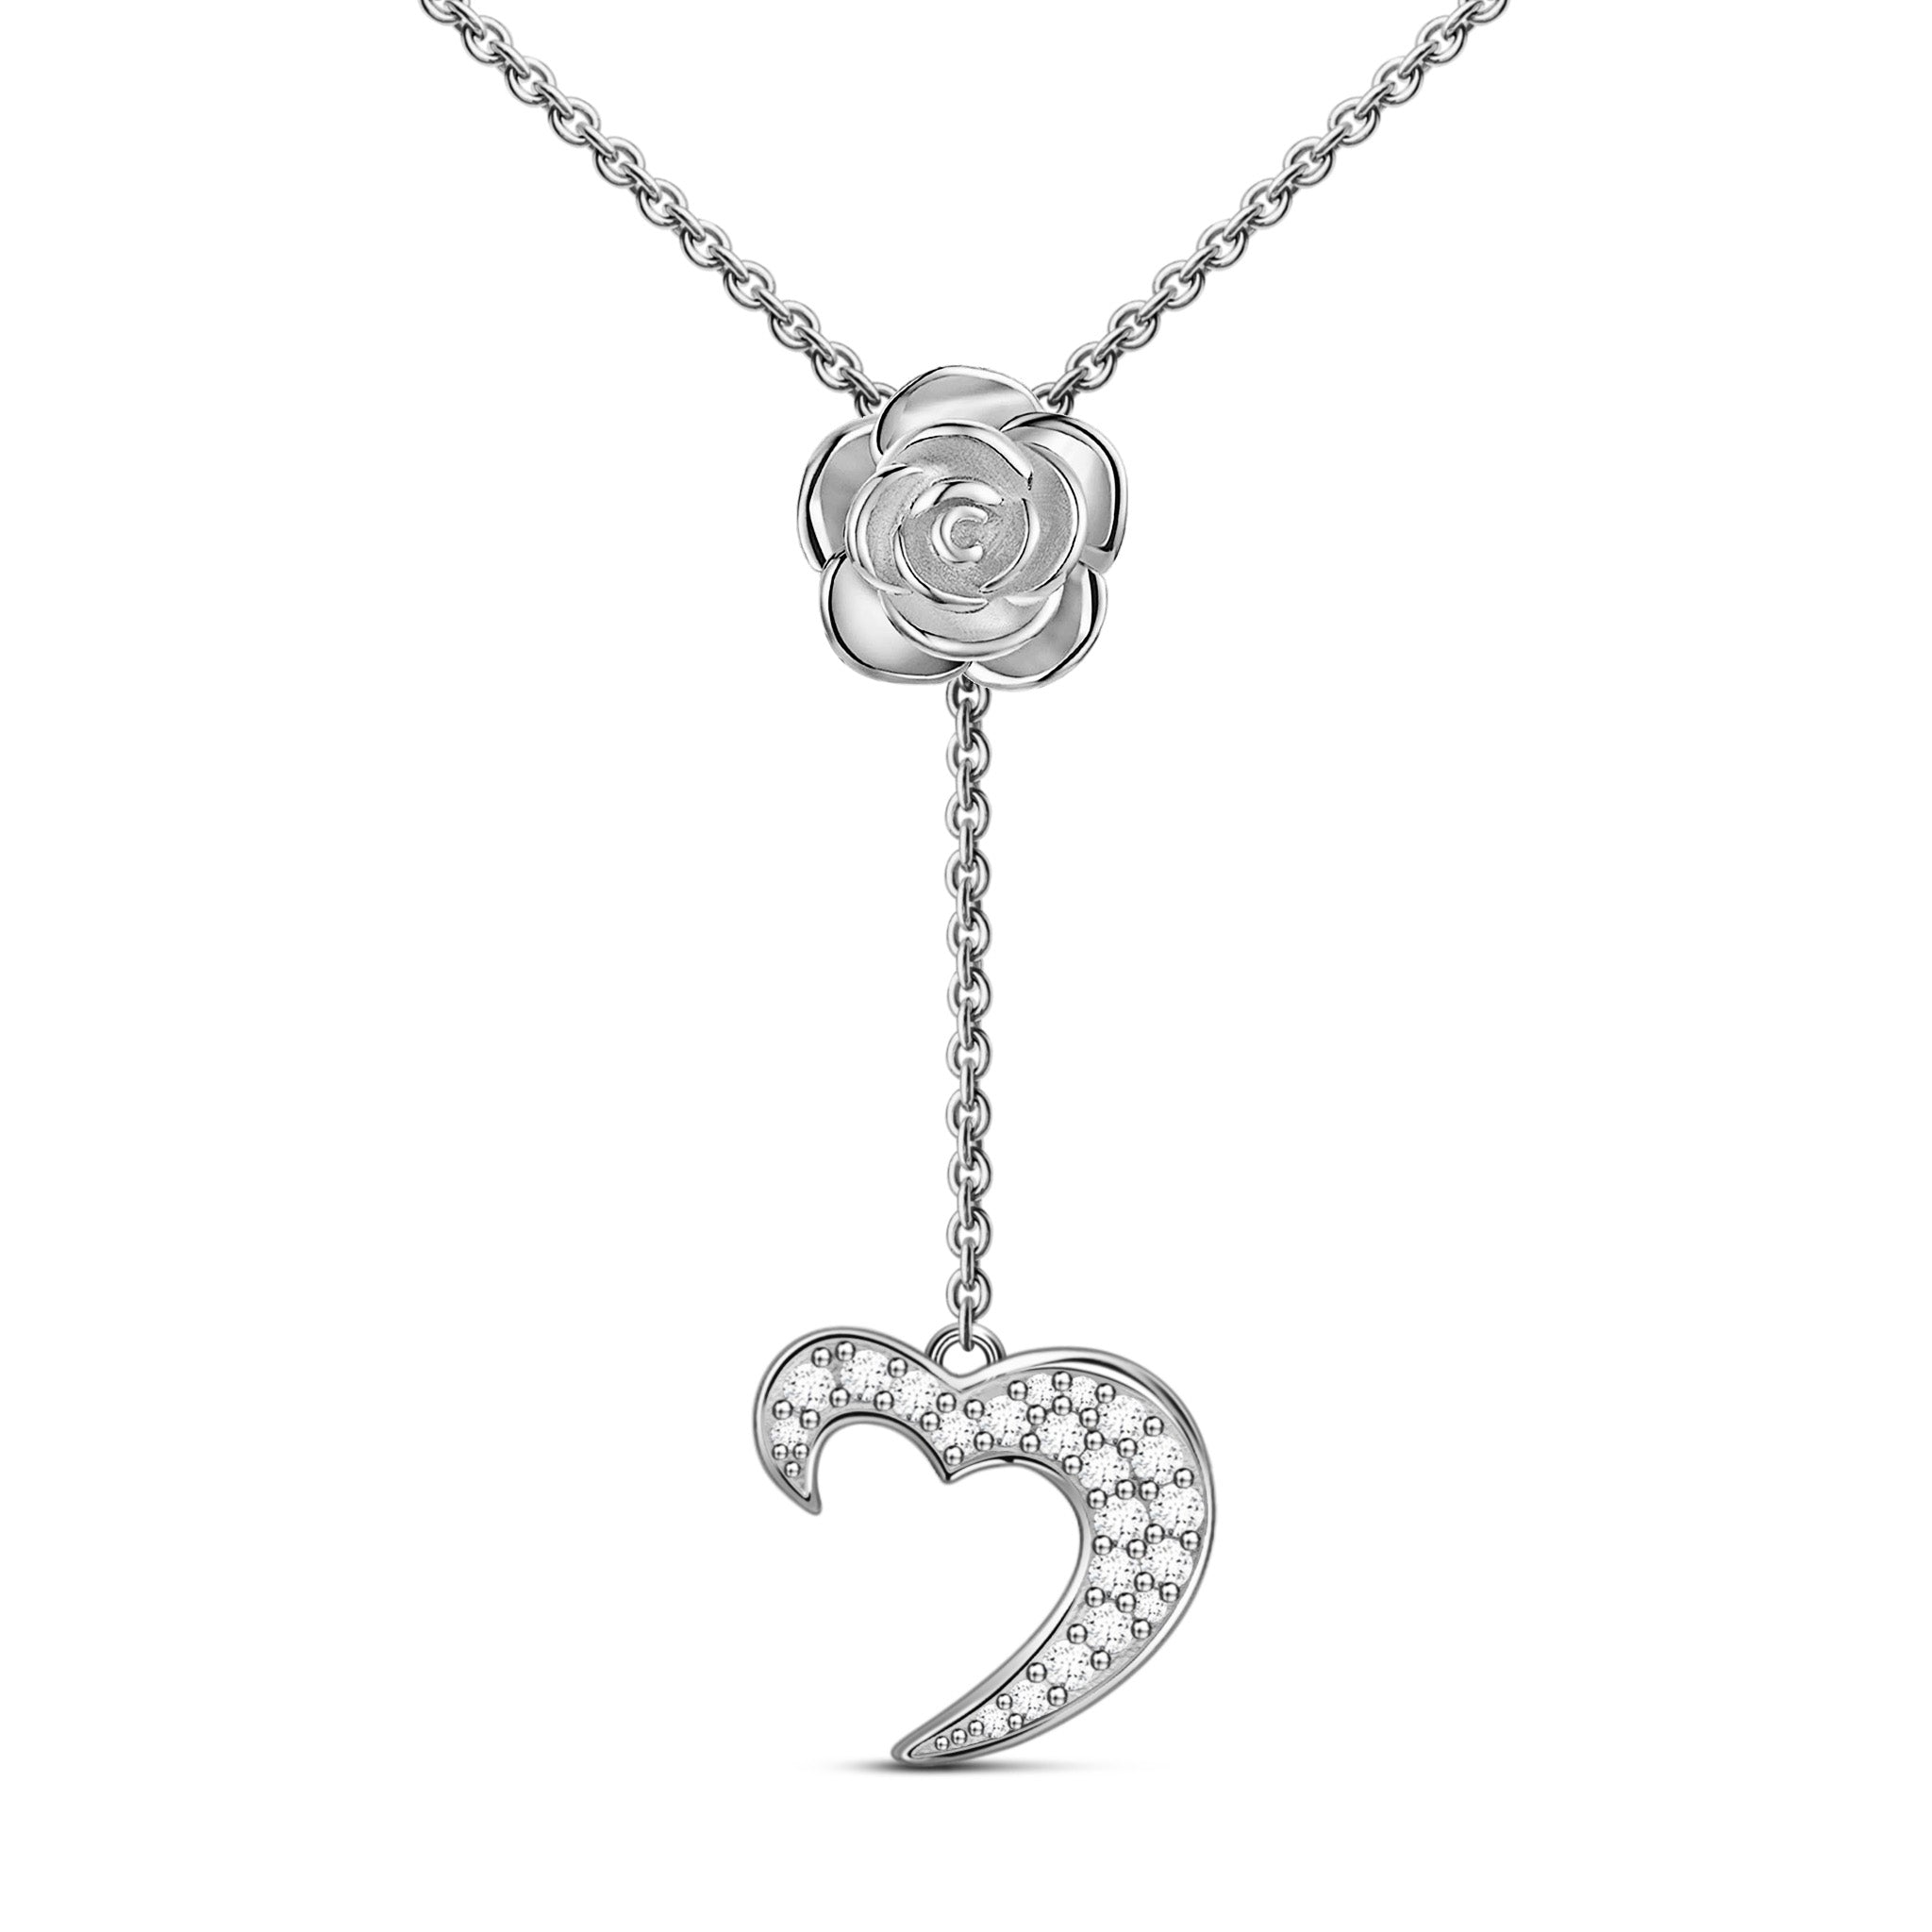 Innocence Purity White Ziconia Sterling Silver Moon of Rose Necklace